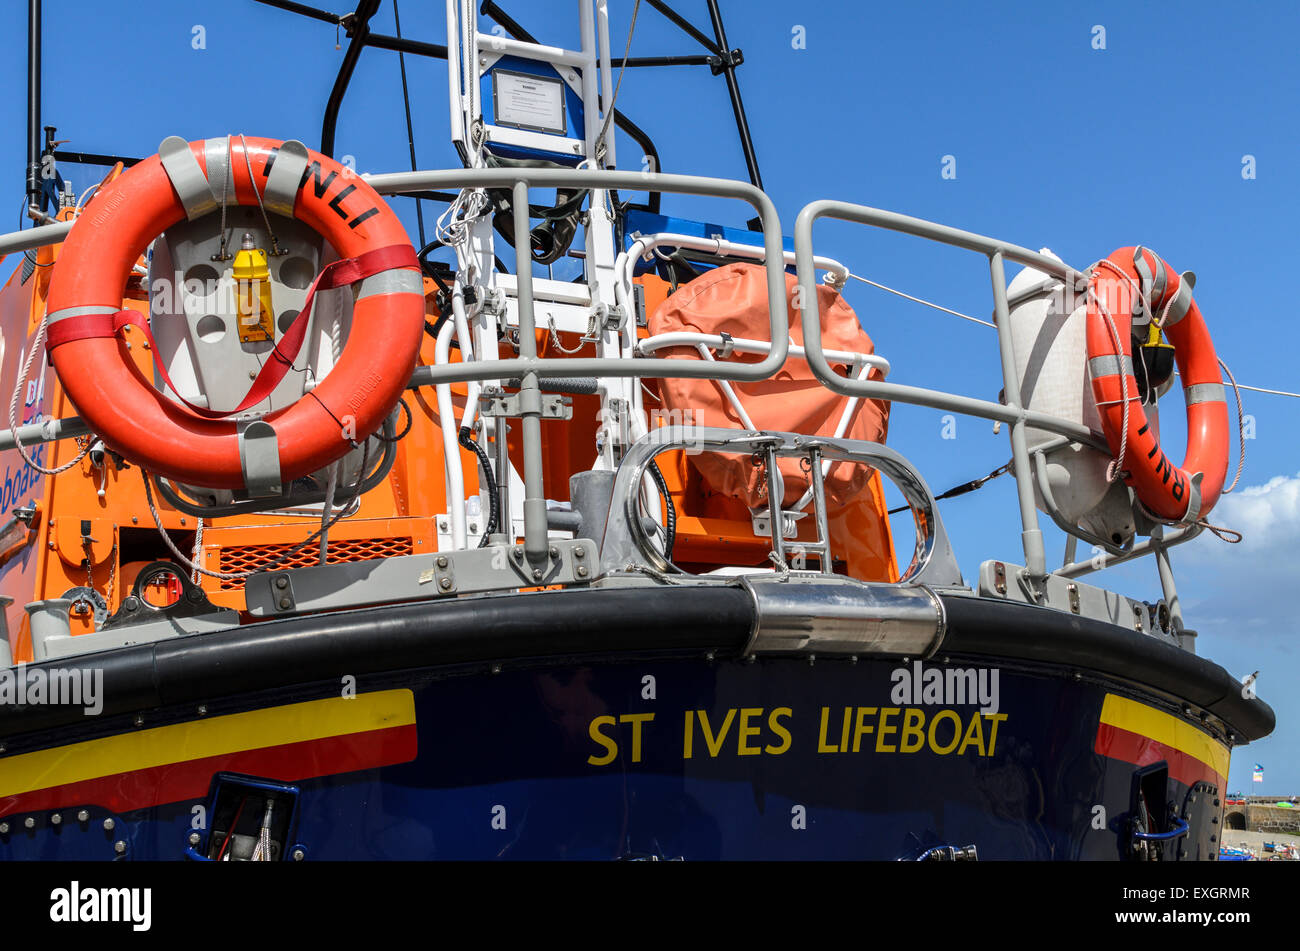 The rear of the St Ives Lifeboat, based at St Ives, Cornwall, England, UK. The Lifeboat is operated by the RNLI. Stock Photo